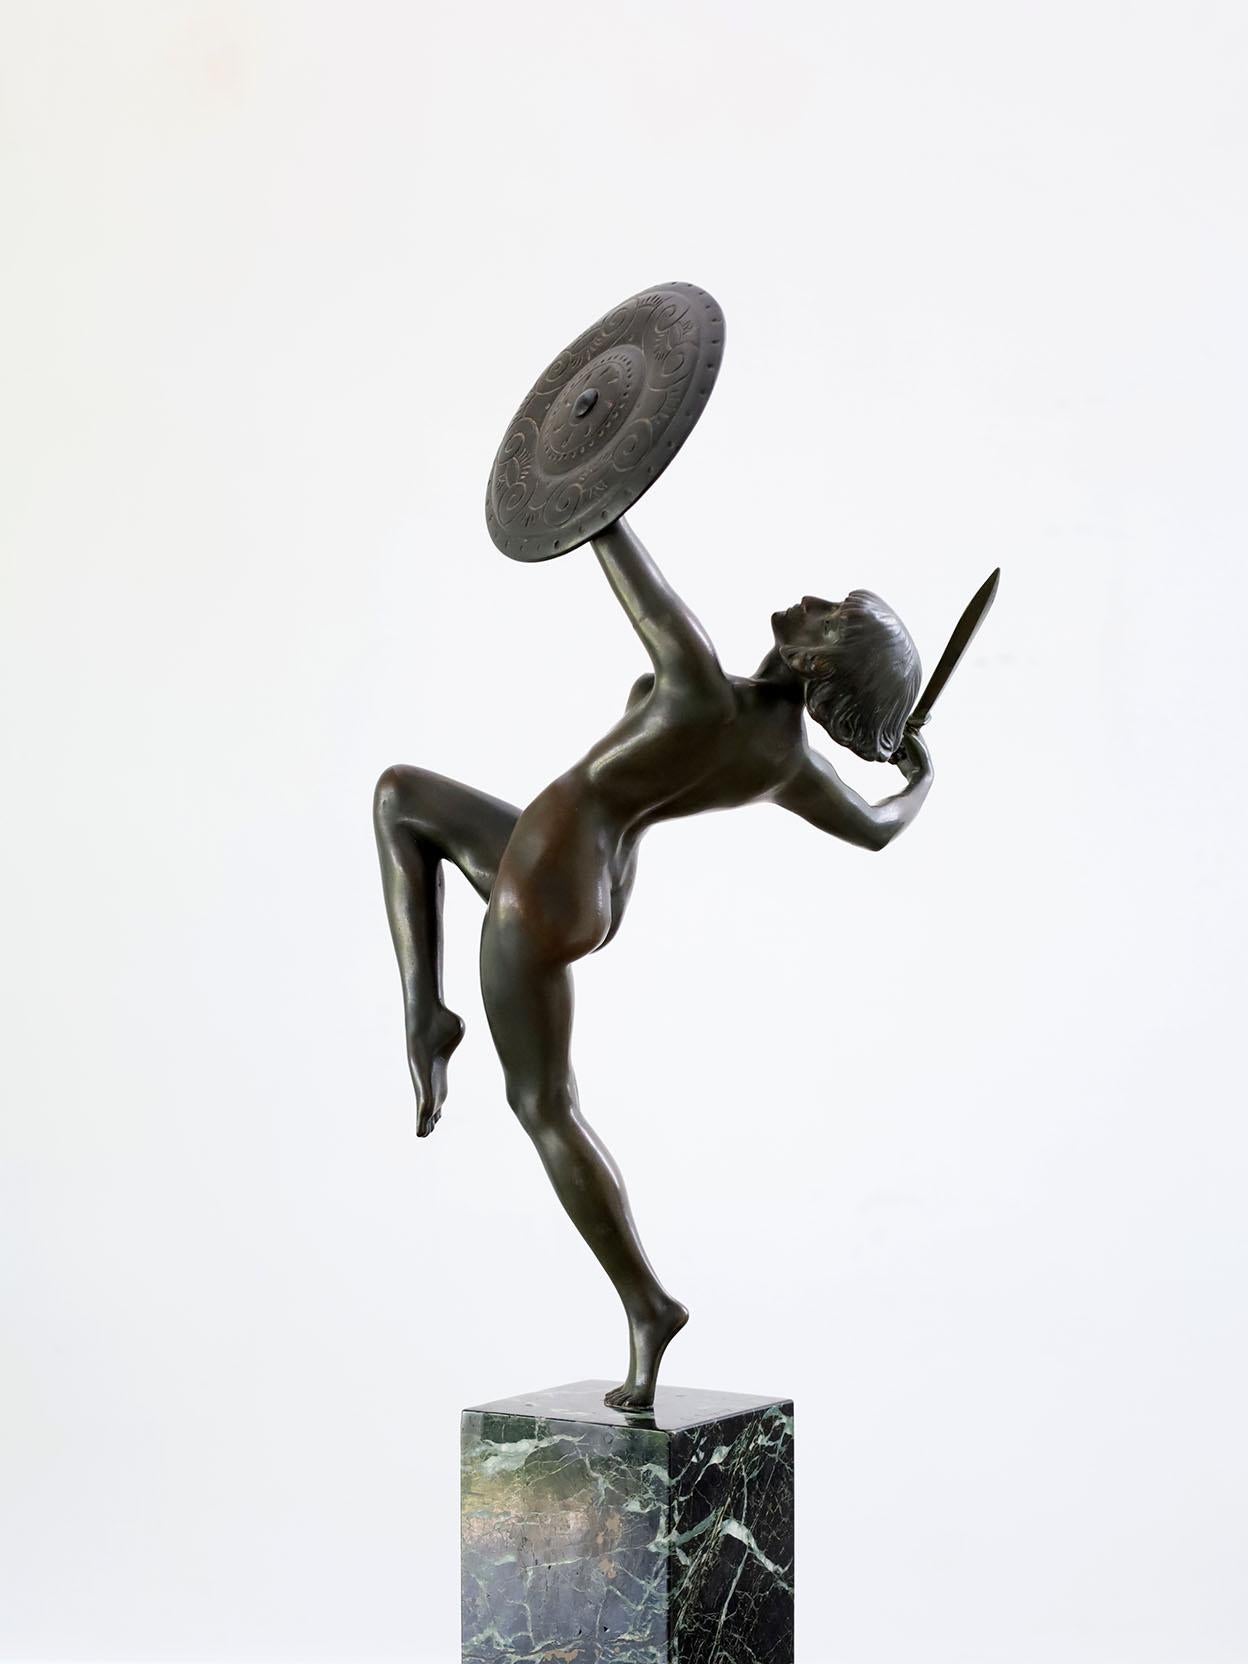 Art Deco bronze sculpture by French Artist Pierre Le Faguays, France 1930. Bronze on green marble base. This sculpture is illustrated in: Art Deco and other figures by Brian Catley, Antique collectors club.